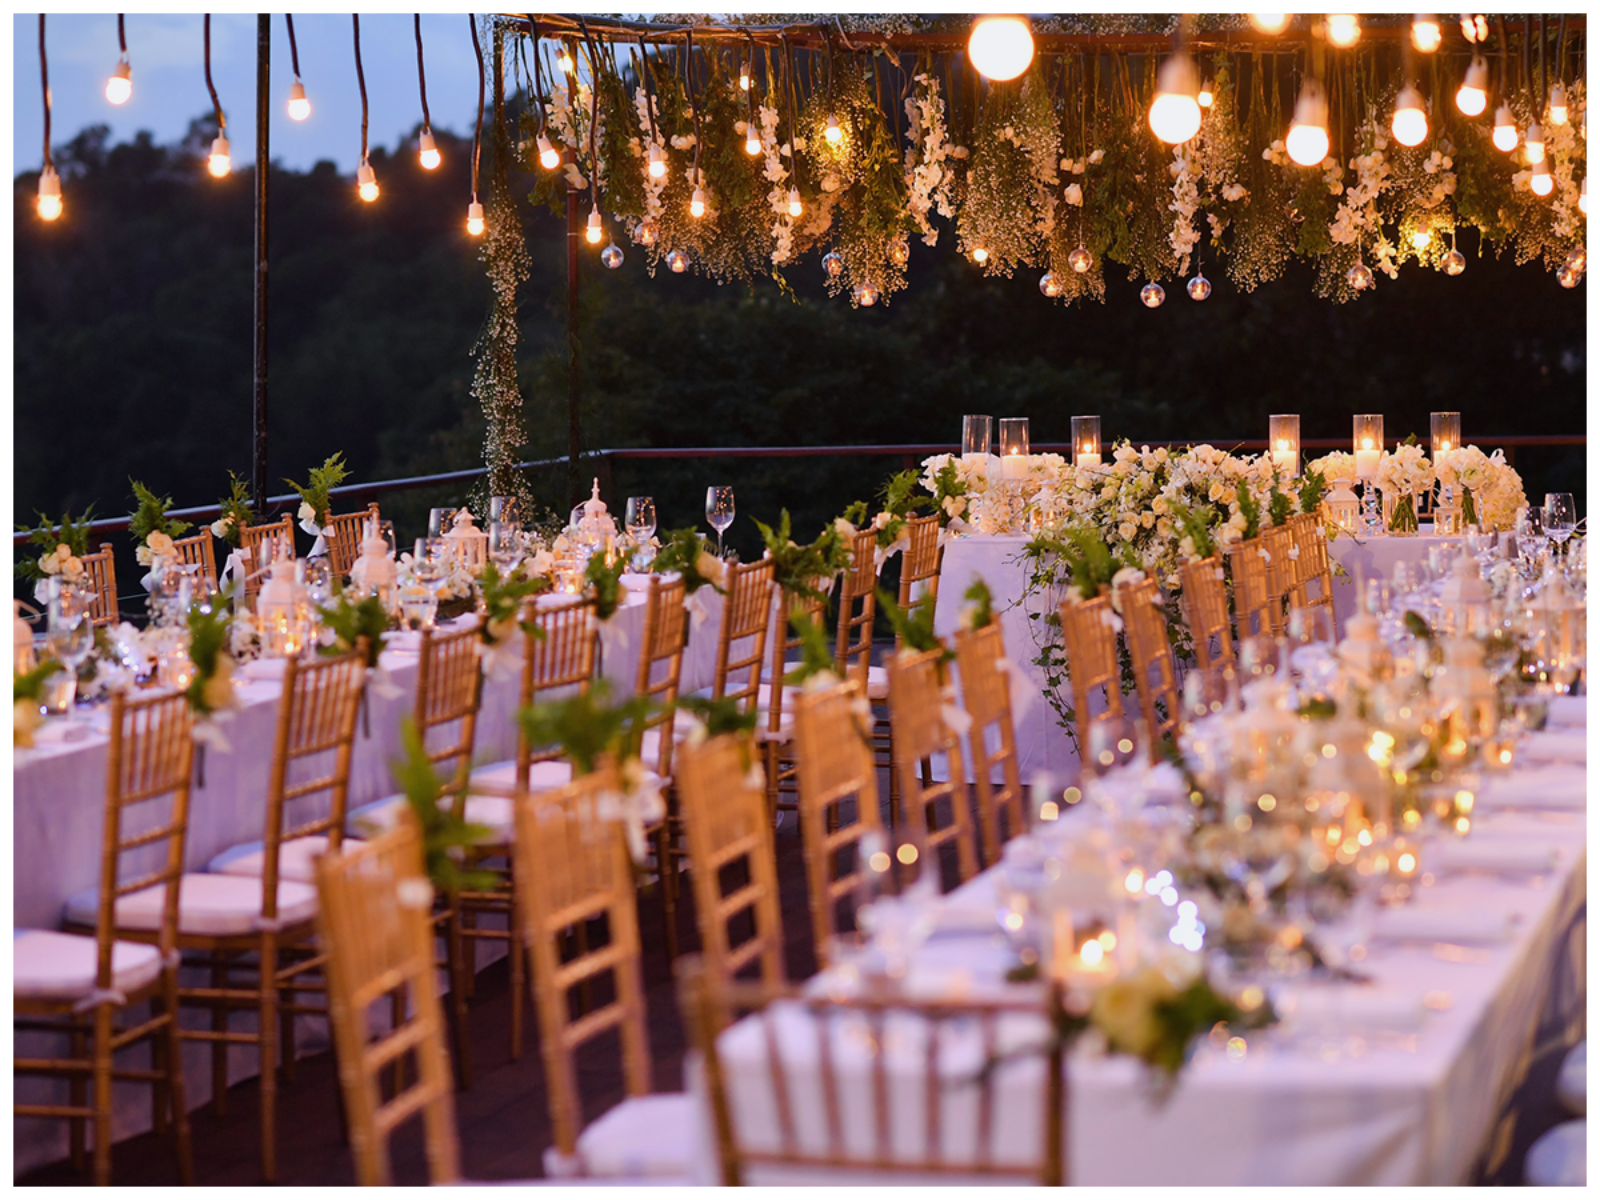 5 reasons to book an event planner